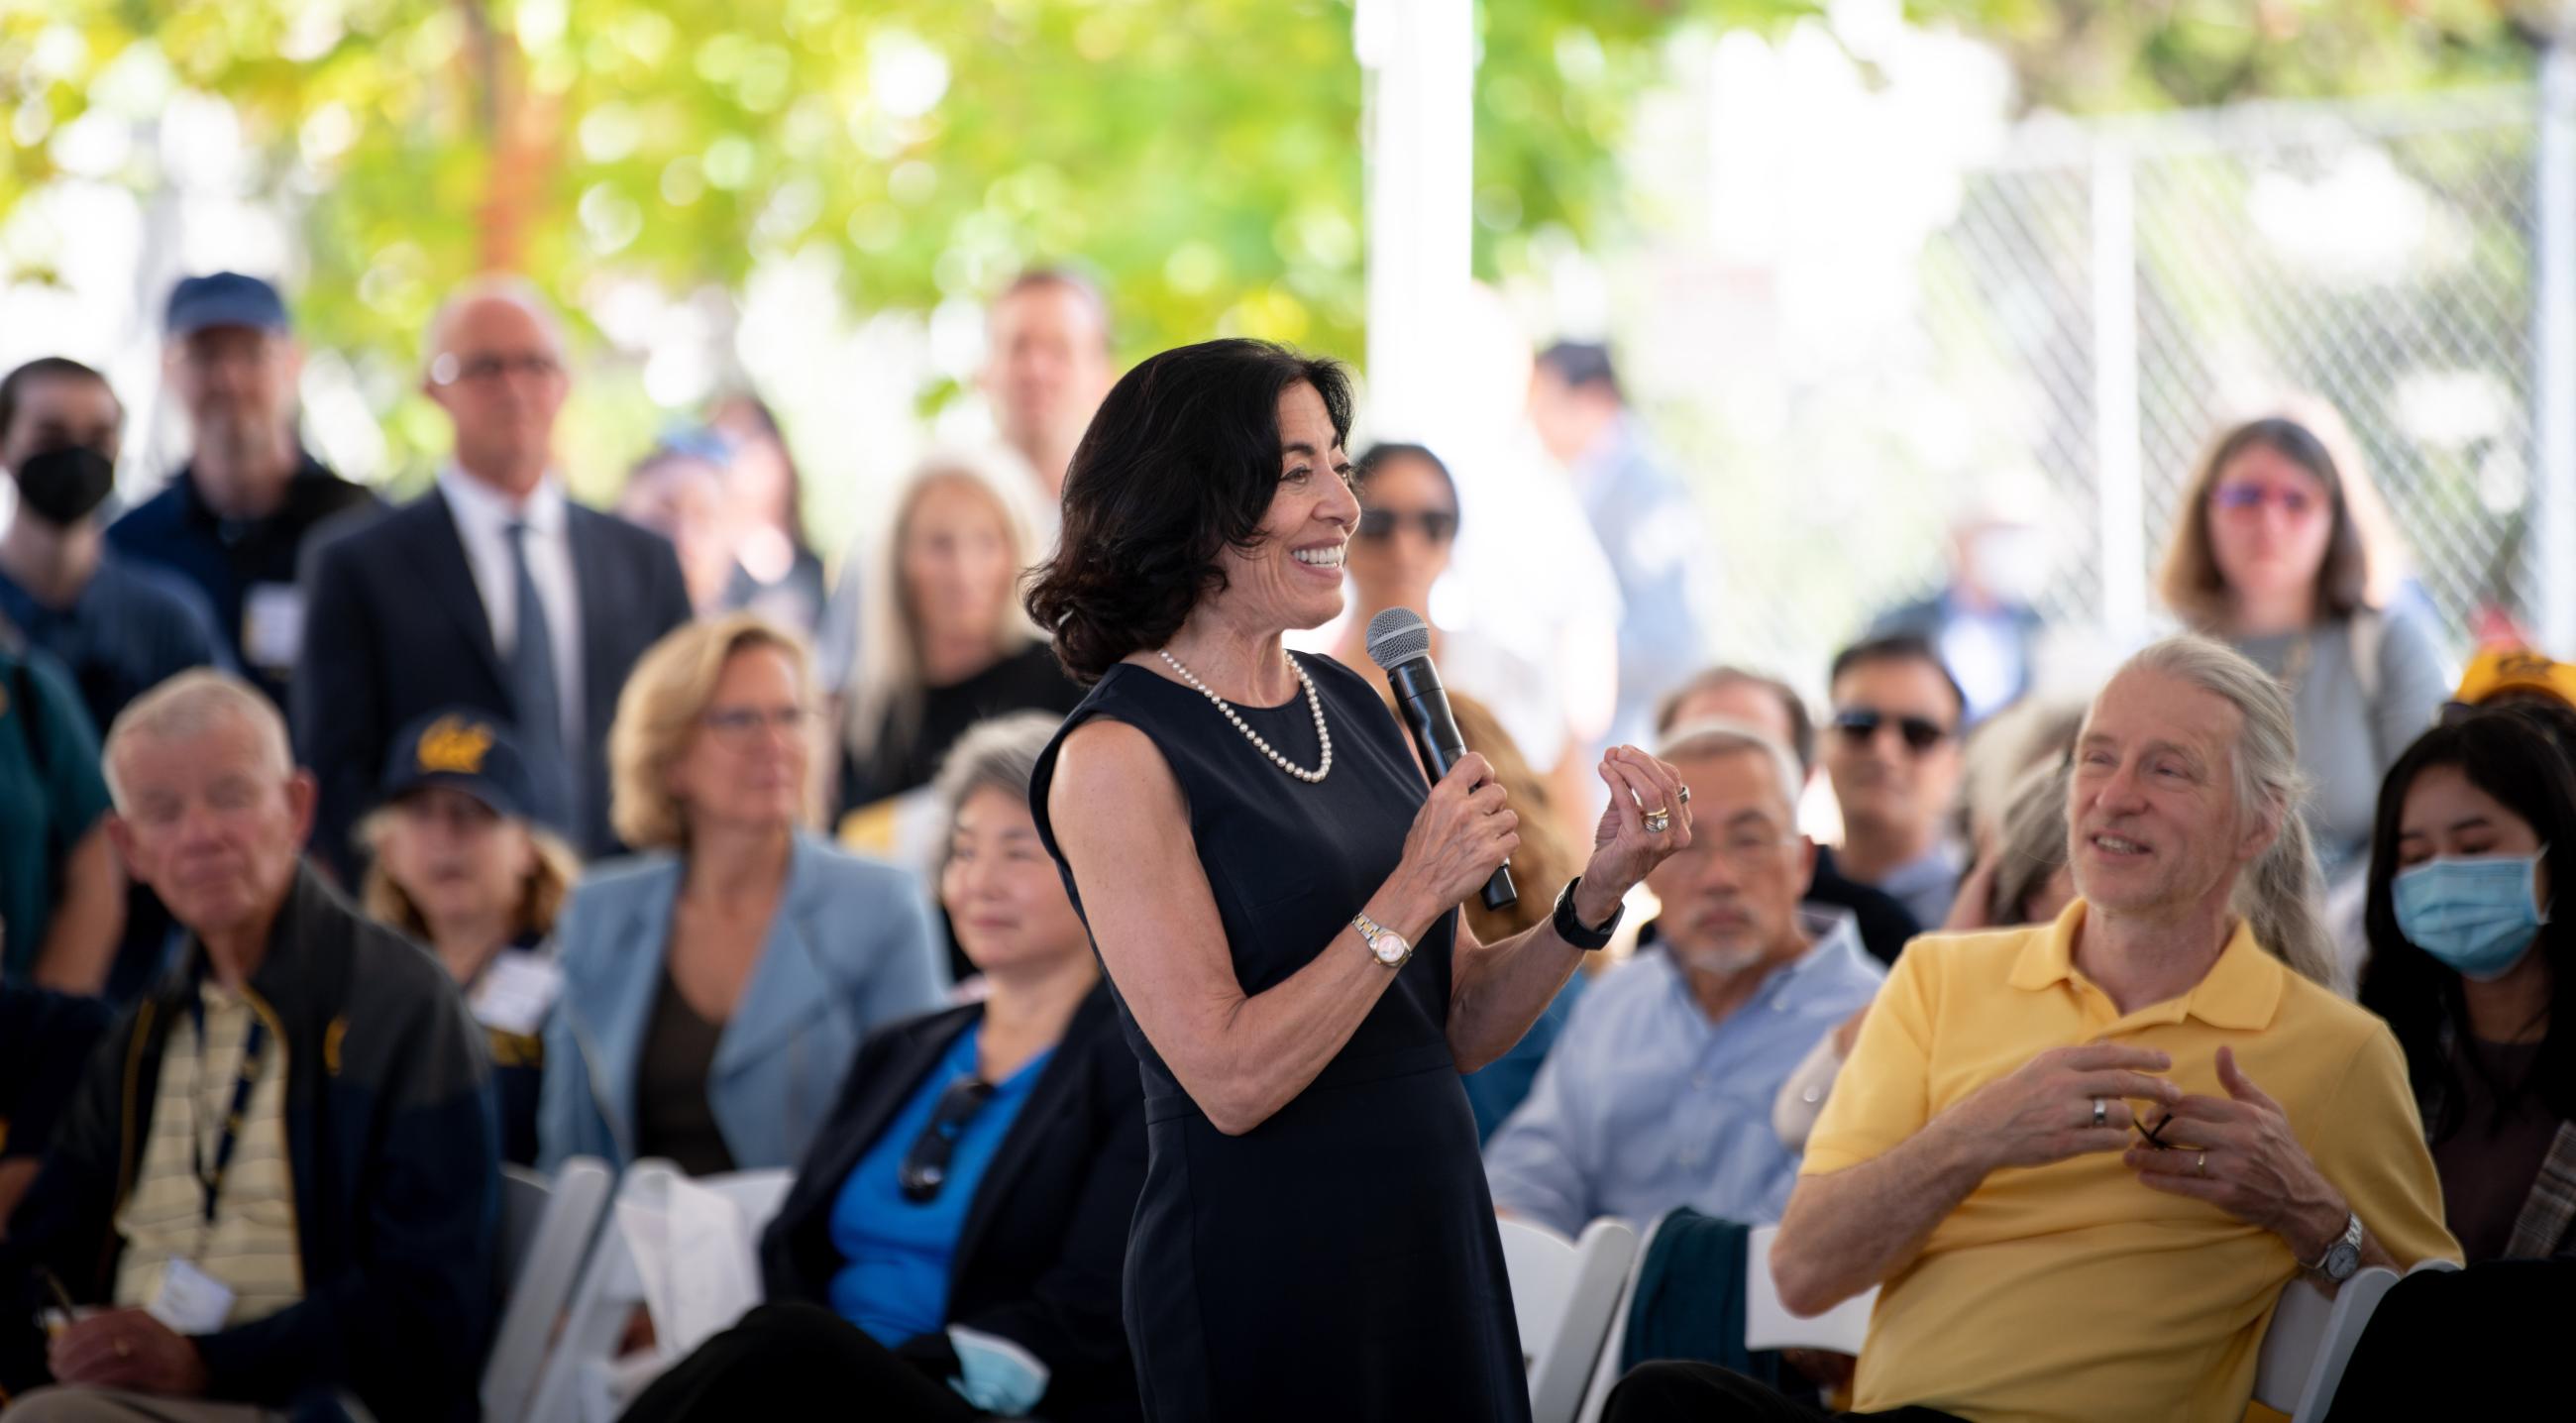 Jennifer Chayes responds to attendee questions at the Gateway groundbreaking. (Photo/ Keegan Houser)